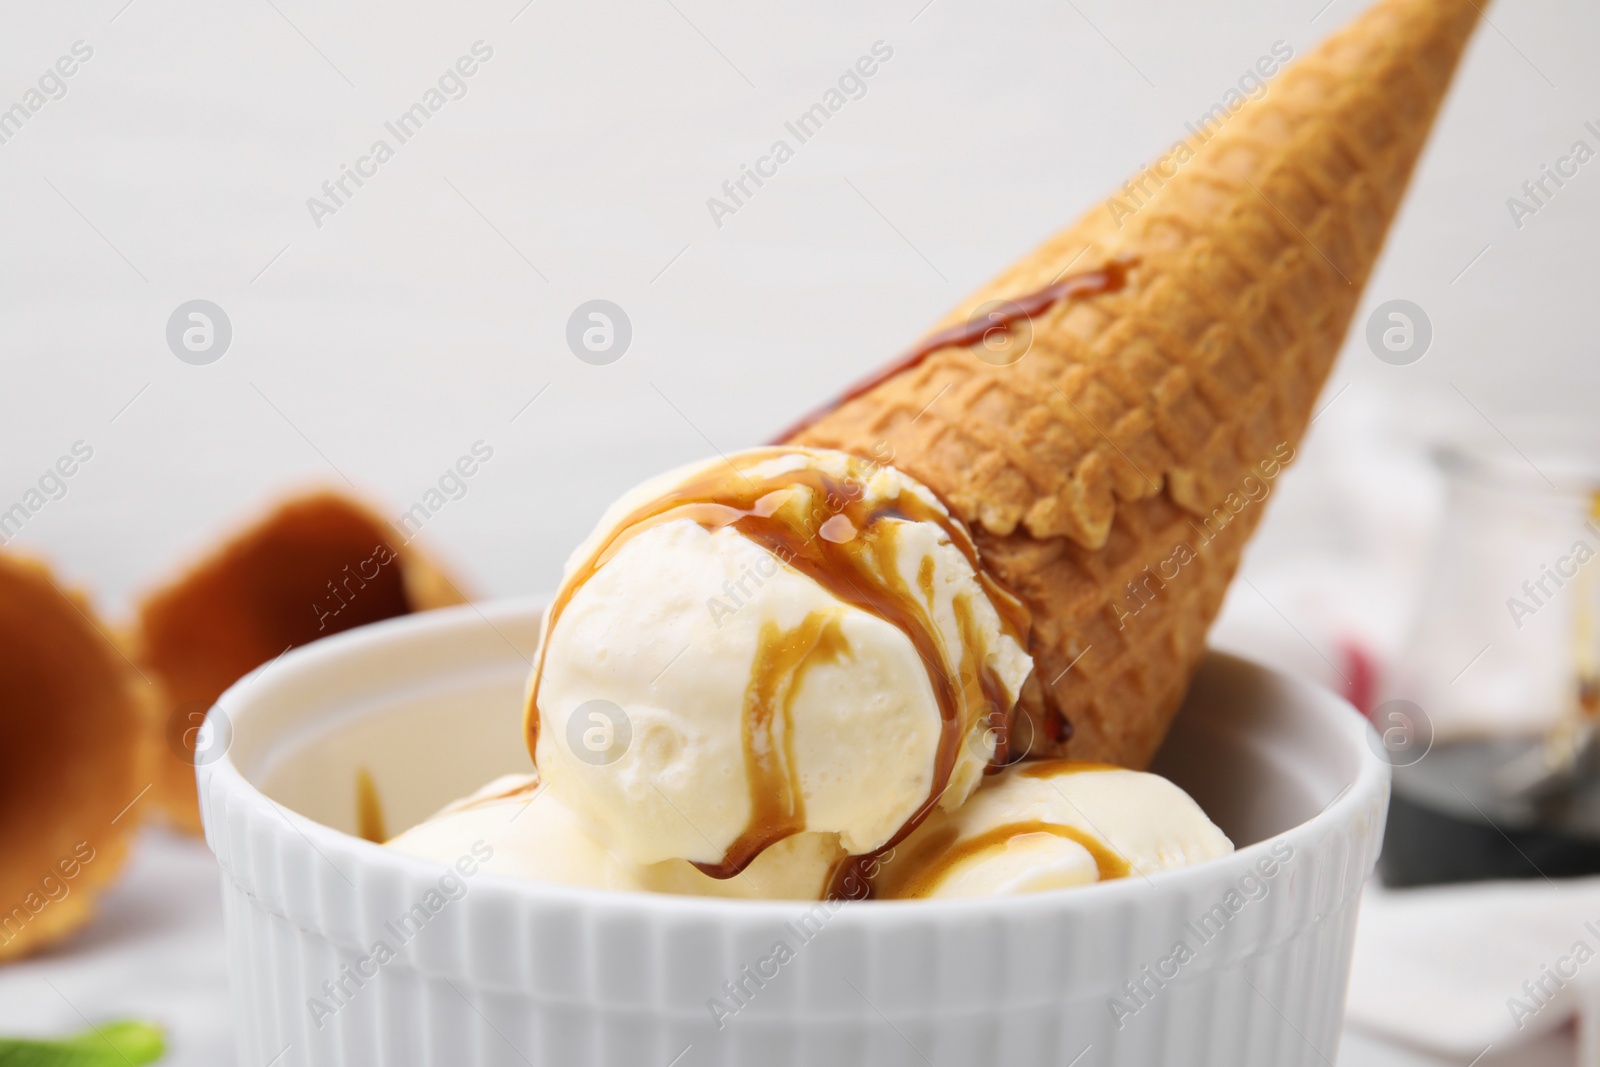 Photo of Scoops of ice cream with caramel sauce and wafer cone in bowl, closeup